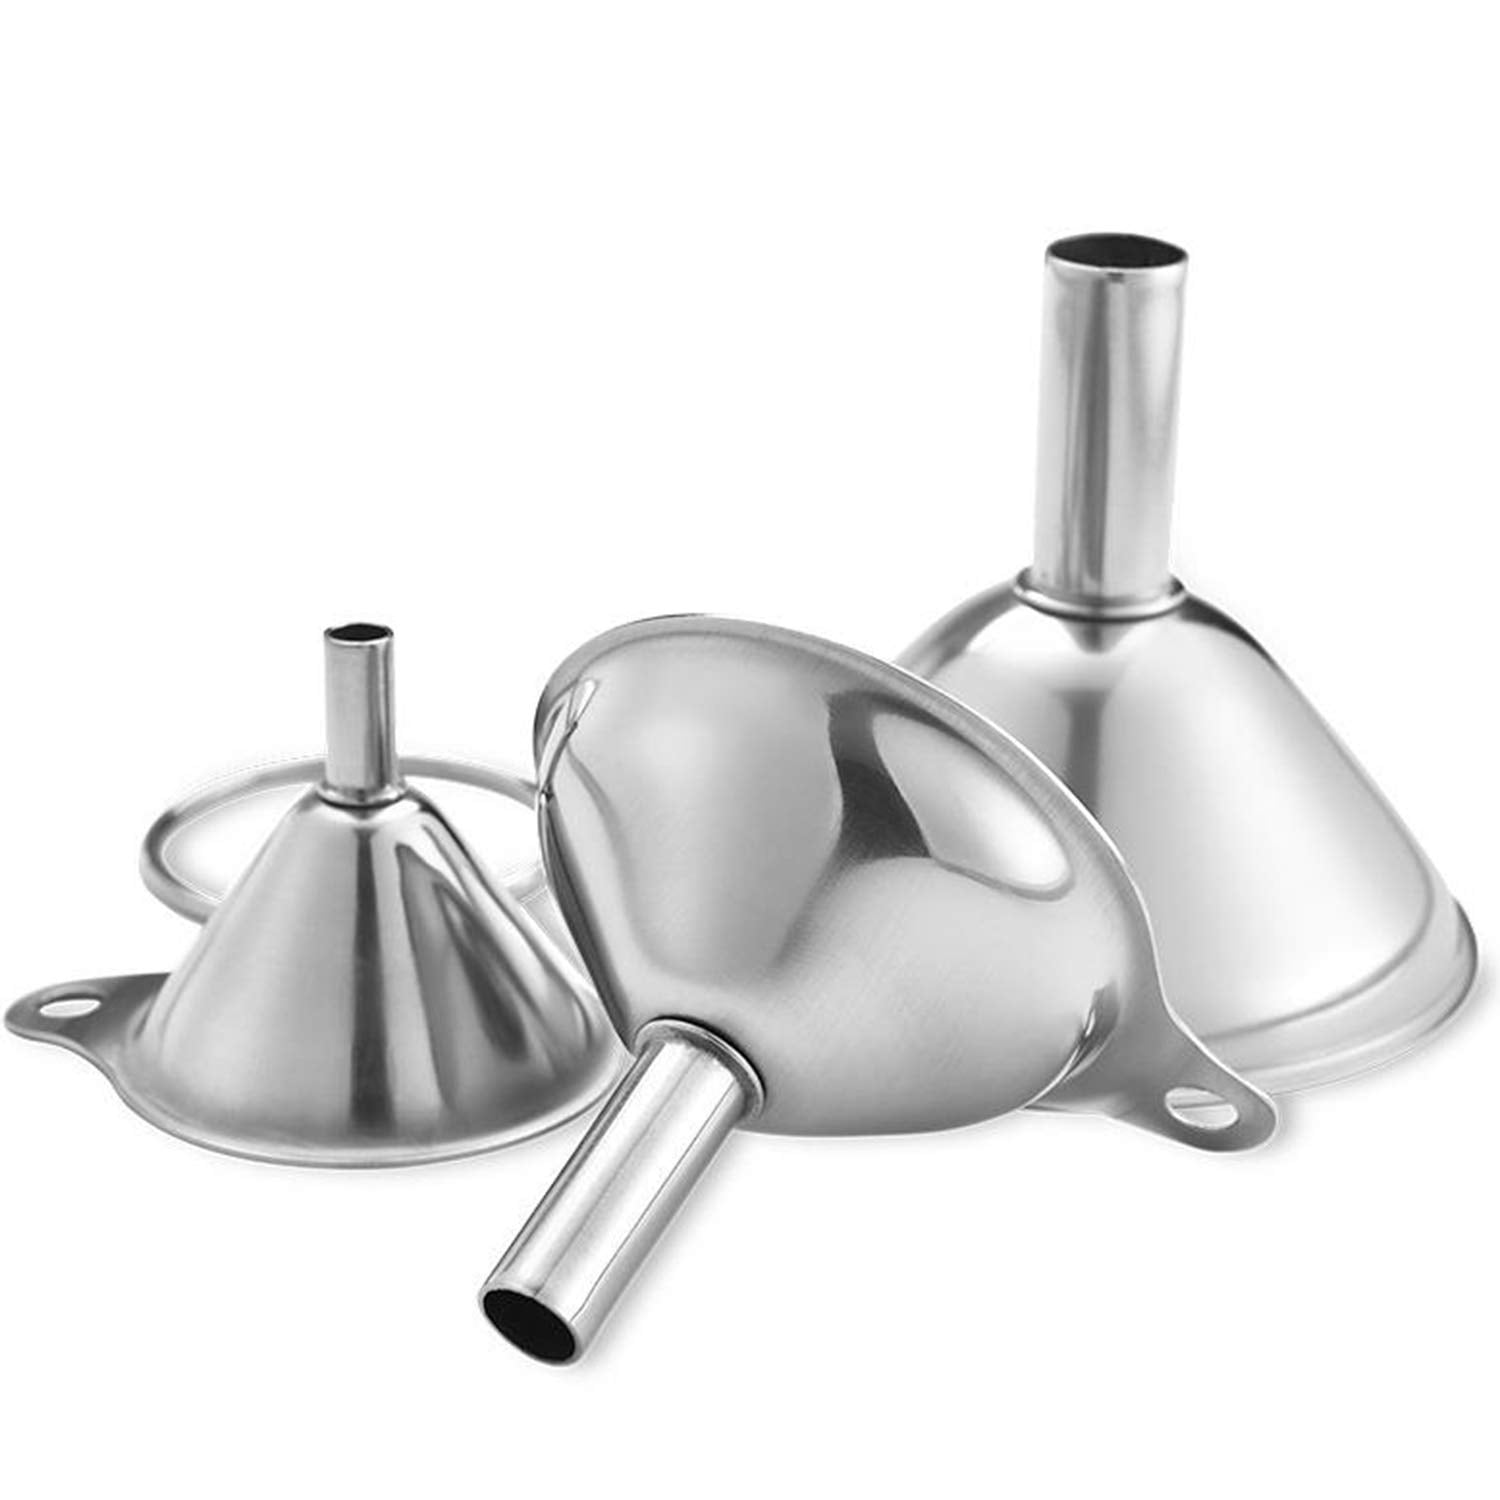 Lakatay Stainless Steel Funnels, 3pcs Mini Filling Kitchen Funnel, Sizes Large to Small Funnels for Transferring Essential Oils, Liquid, Fluid, Dry